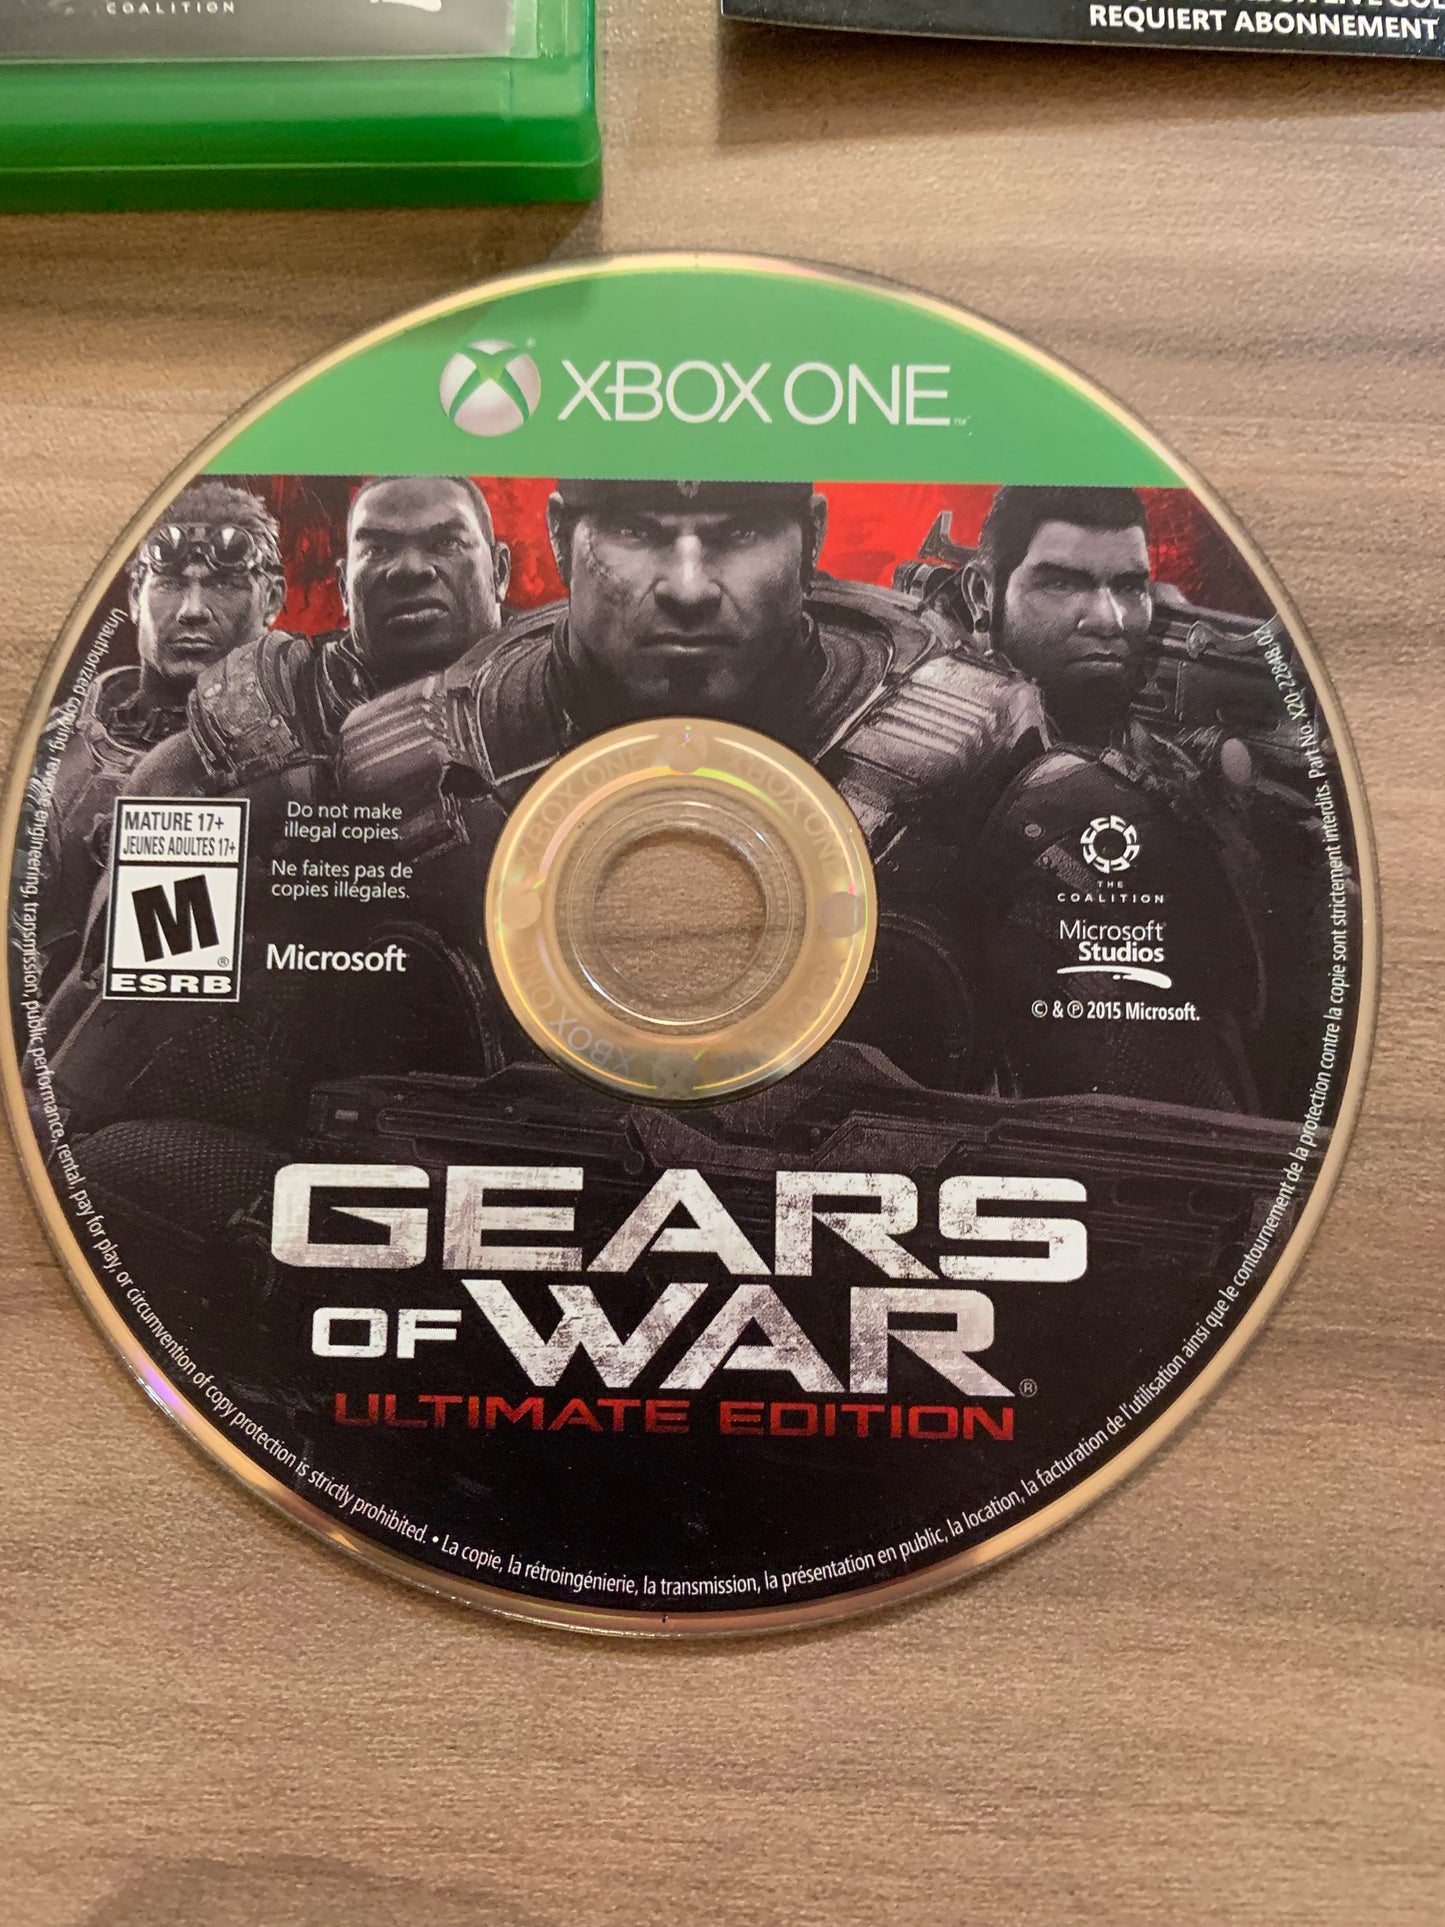 MiCROSOFT XBOX ONE | GEARS OF WAR | ULTiMATE EDiTiON